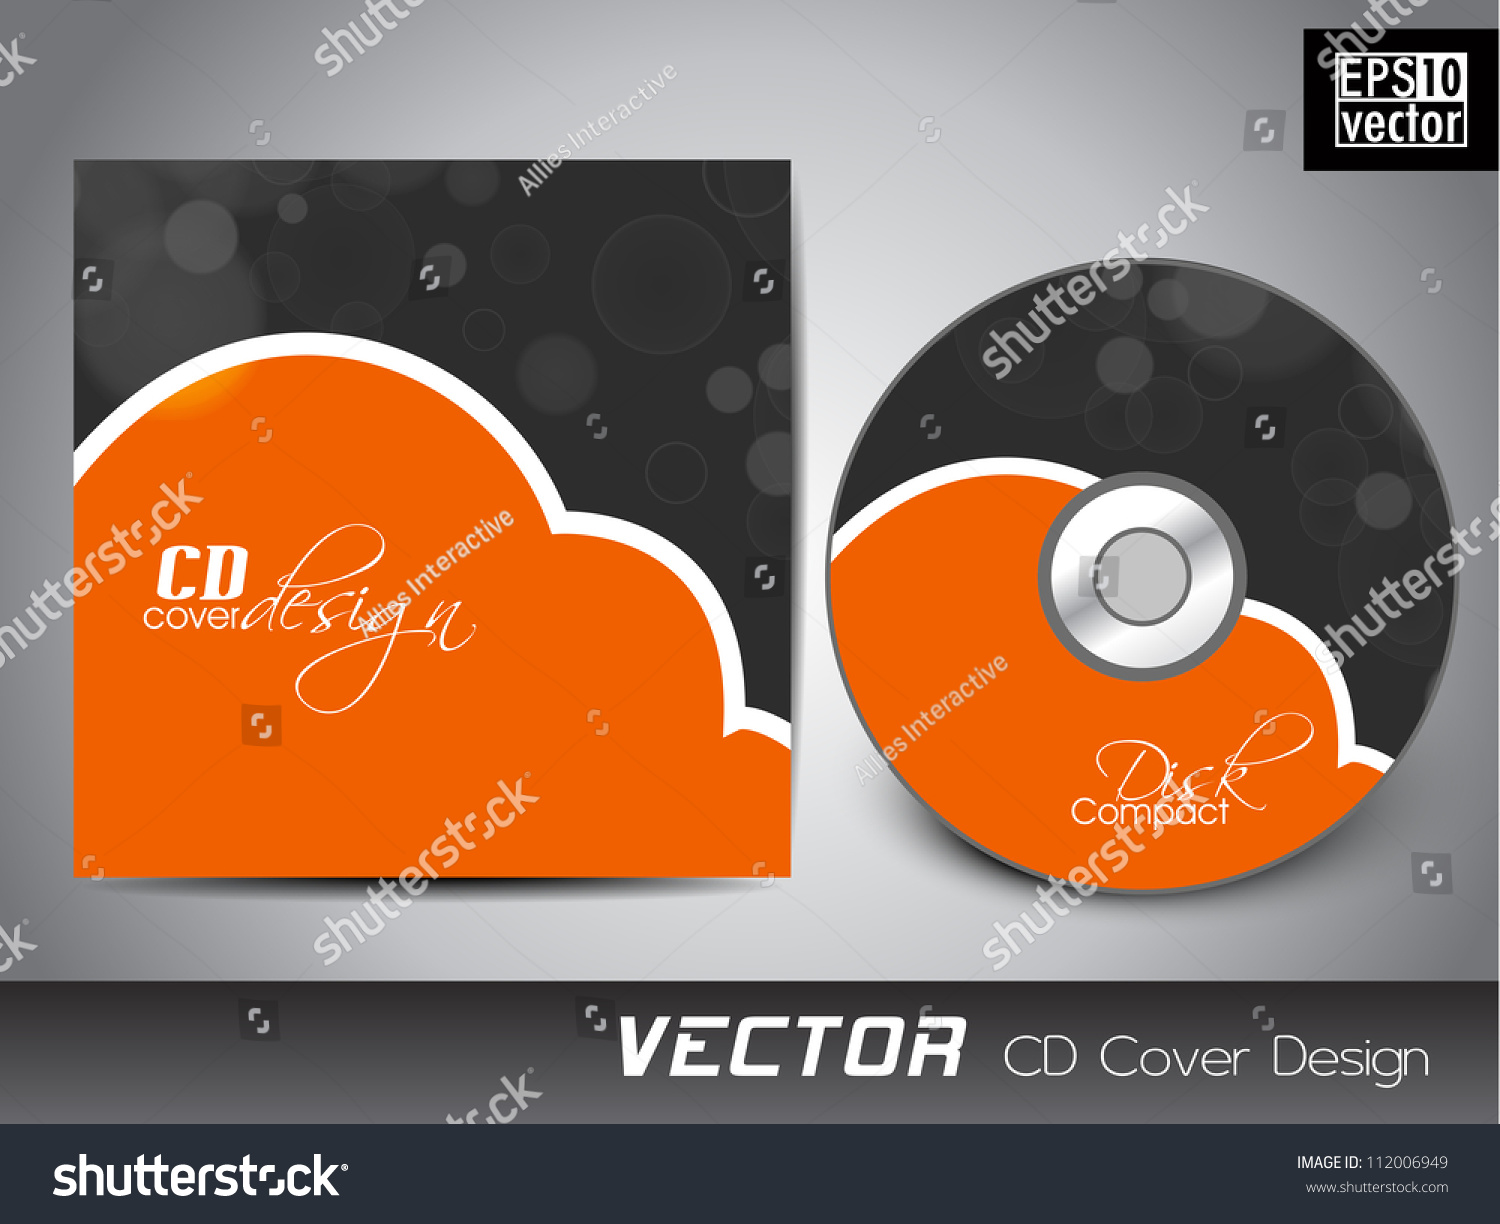 Abstract Cd Cover Design Template.Vector Illustration Eps 10